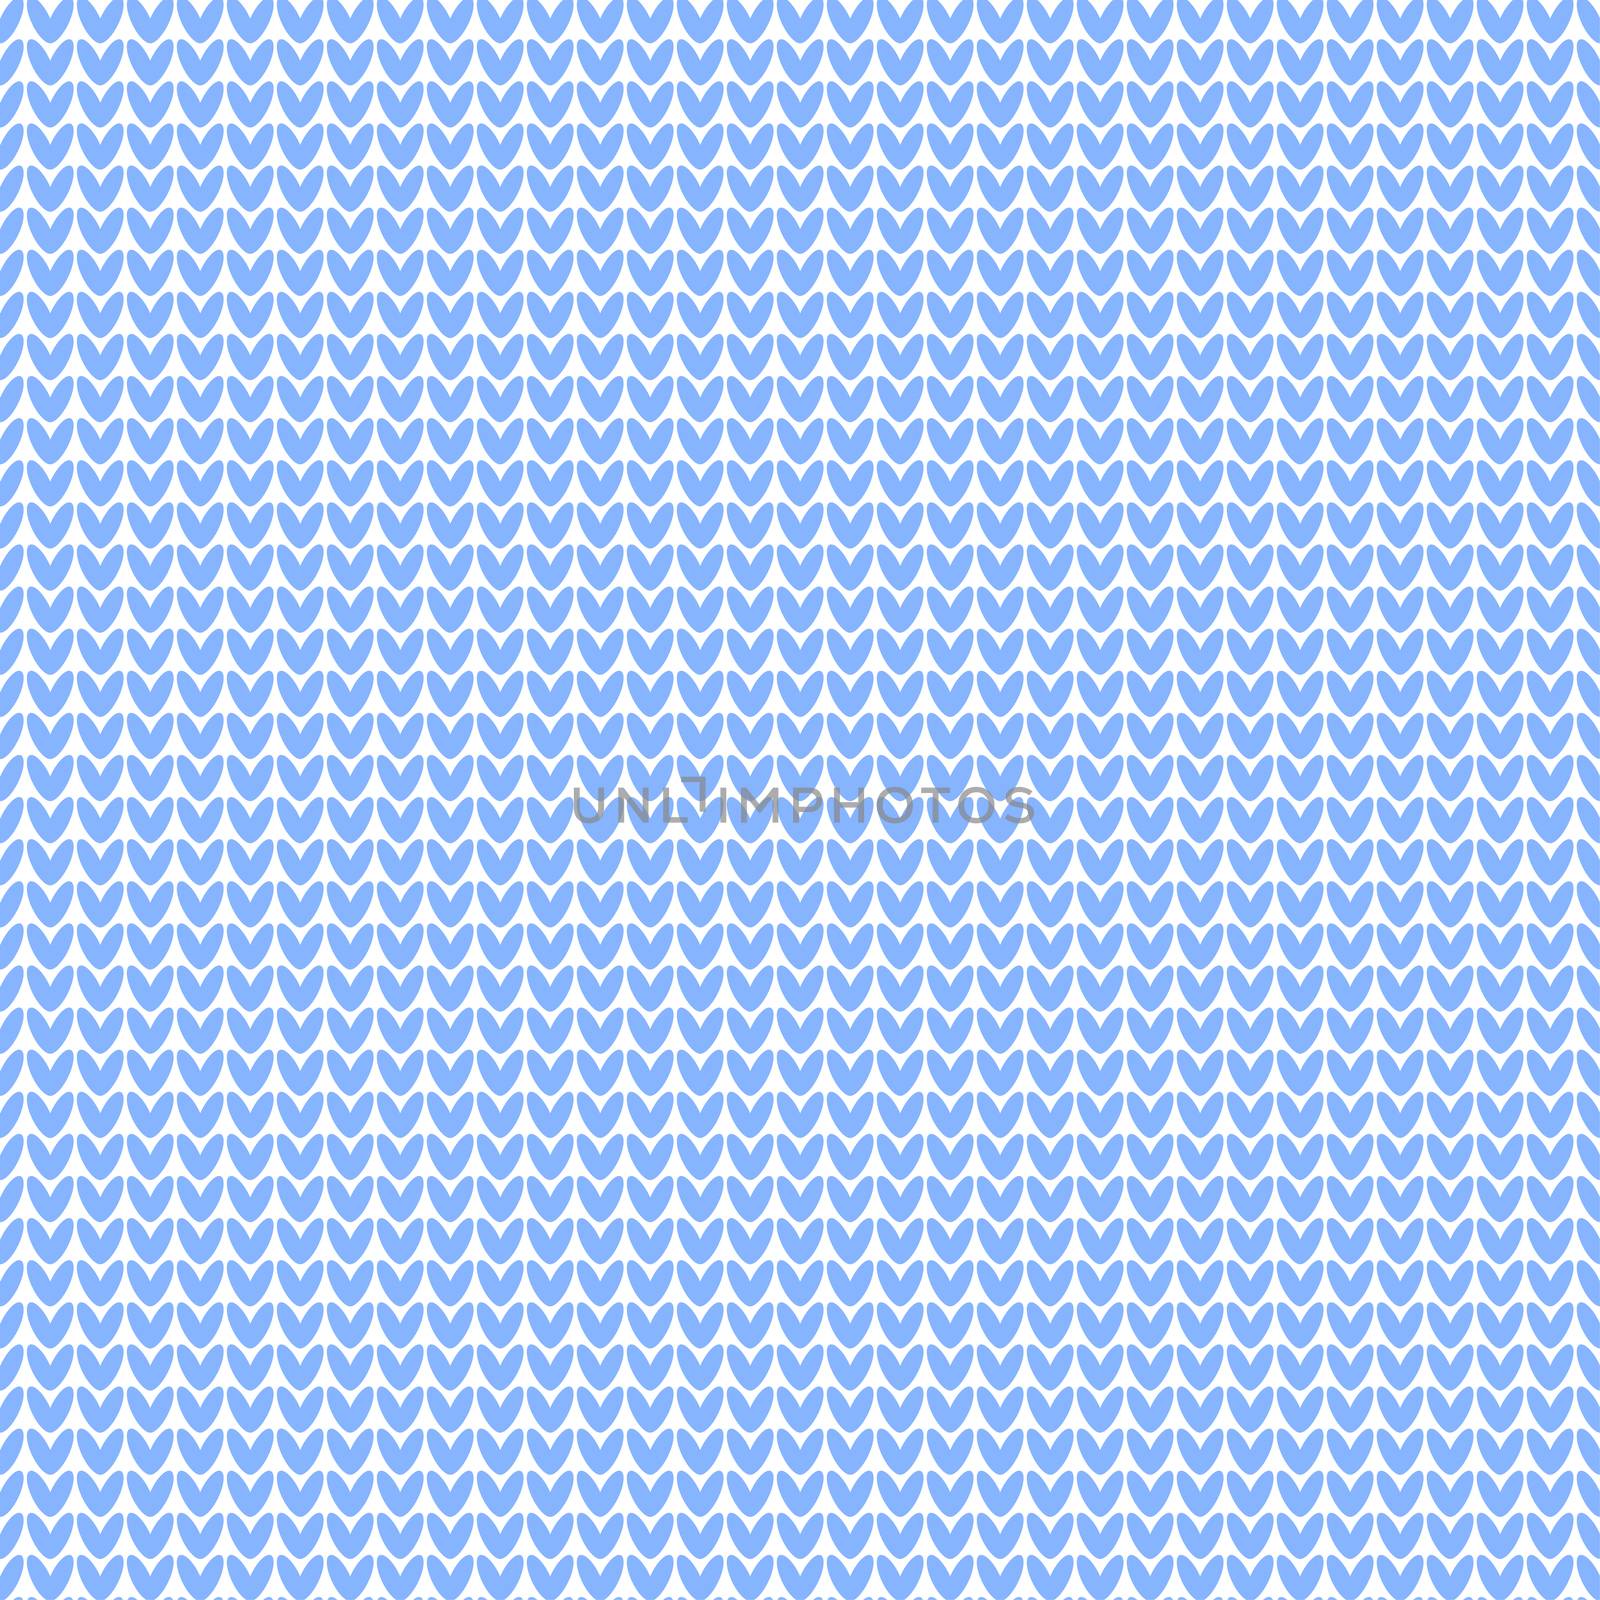 Knitted realistic seamless pattern of blue color. Knit texture.